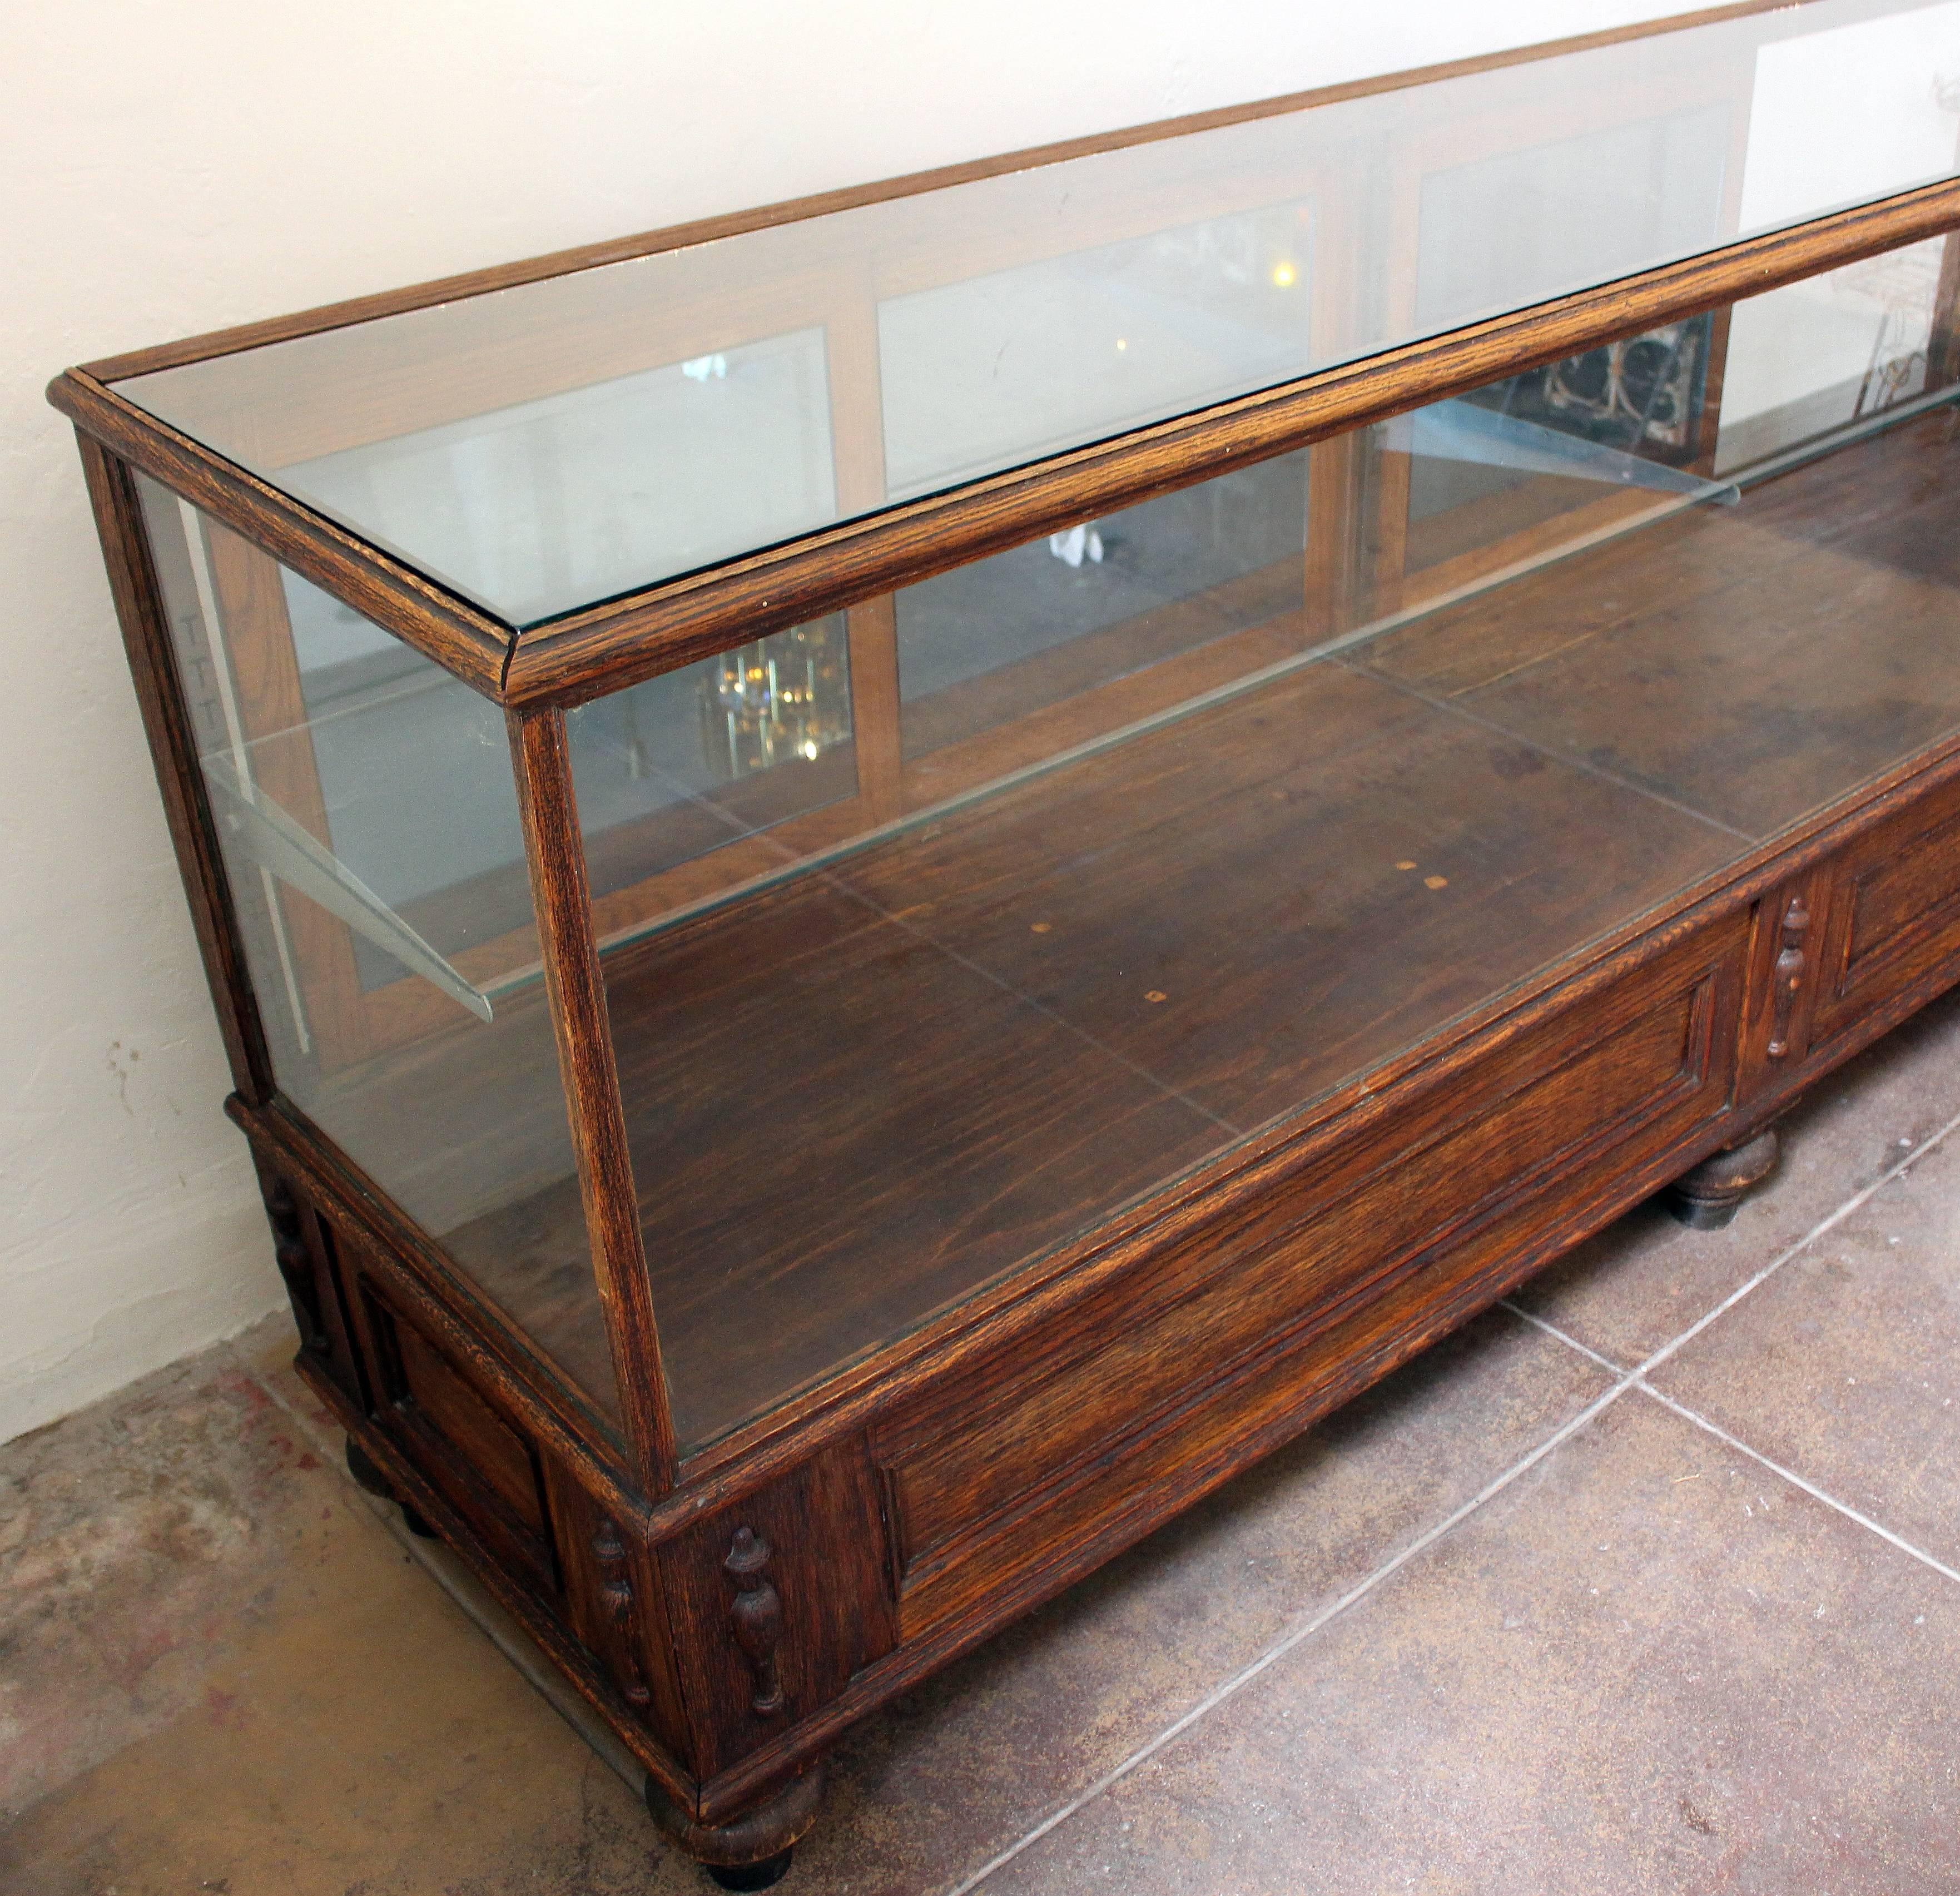 Early 20th Century Antique Glass Case by Grand Rapid Store Equipment